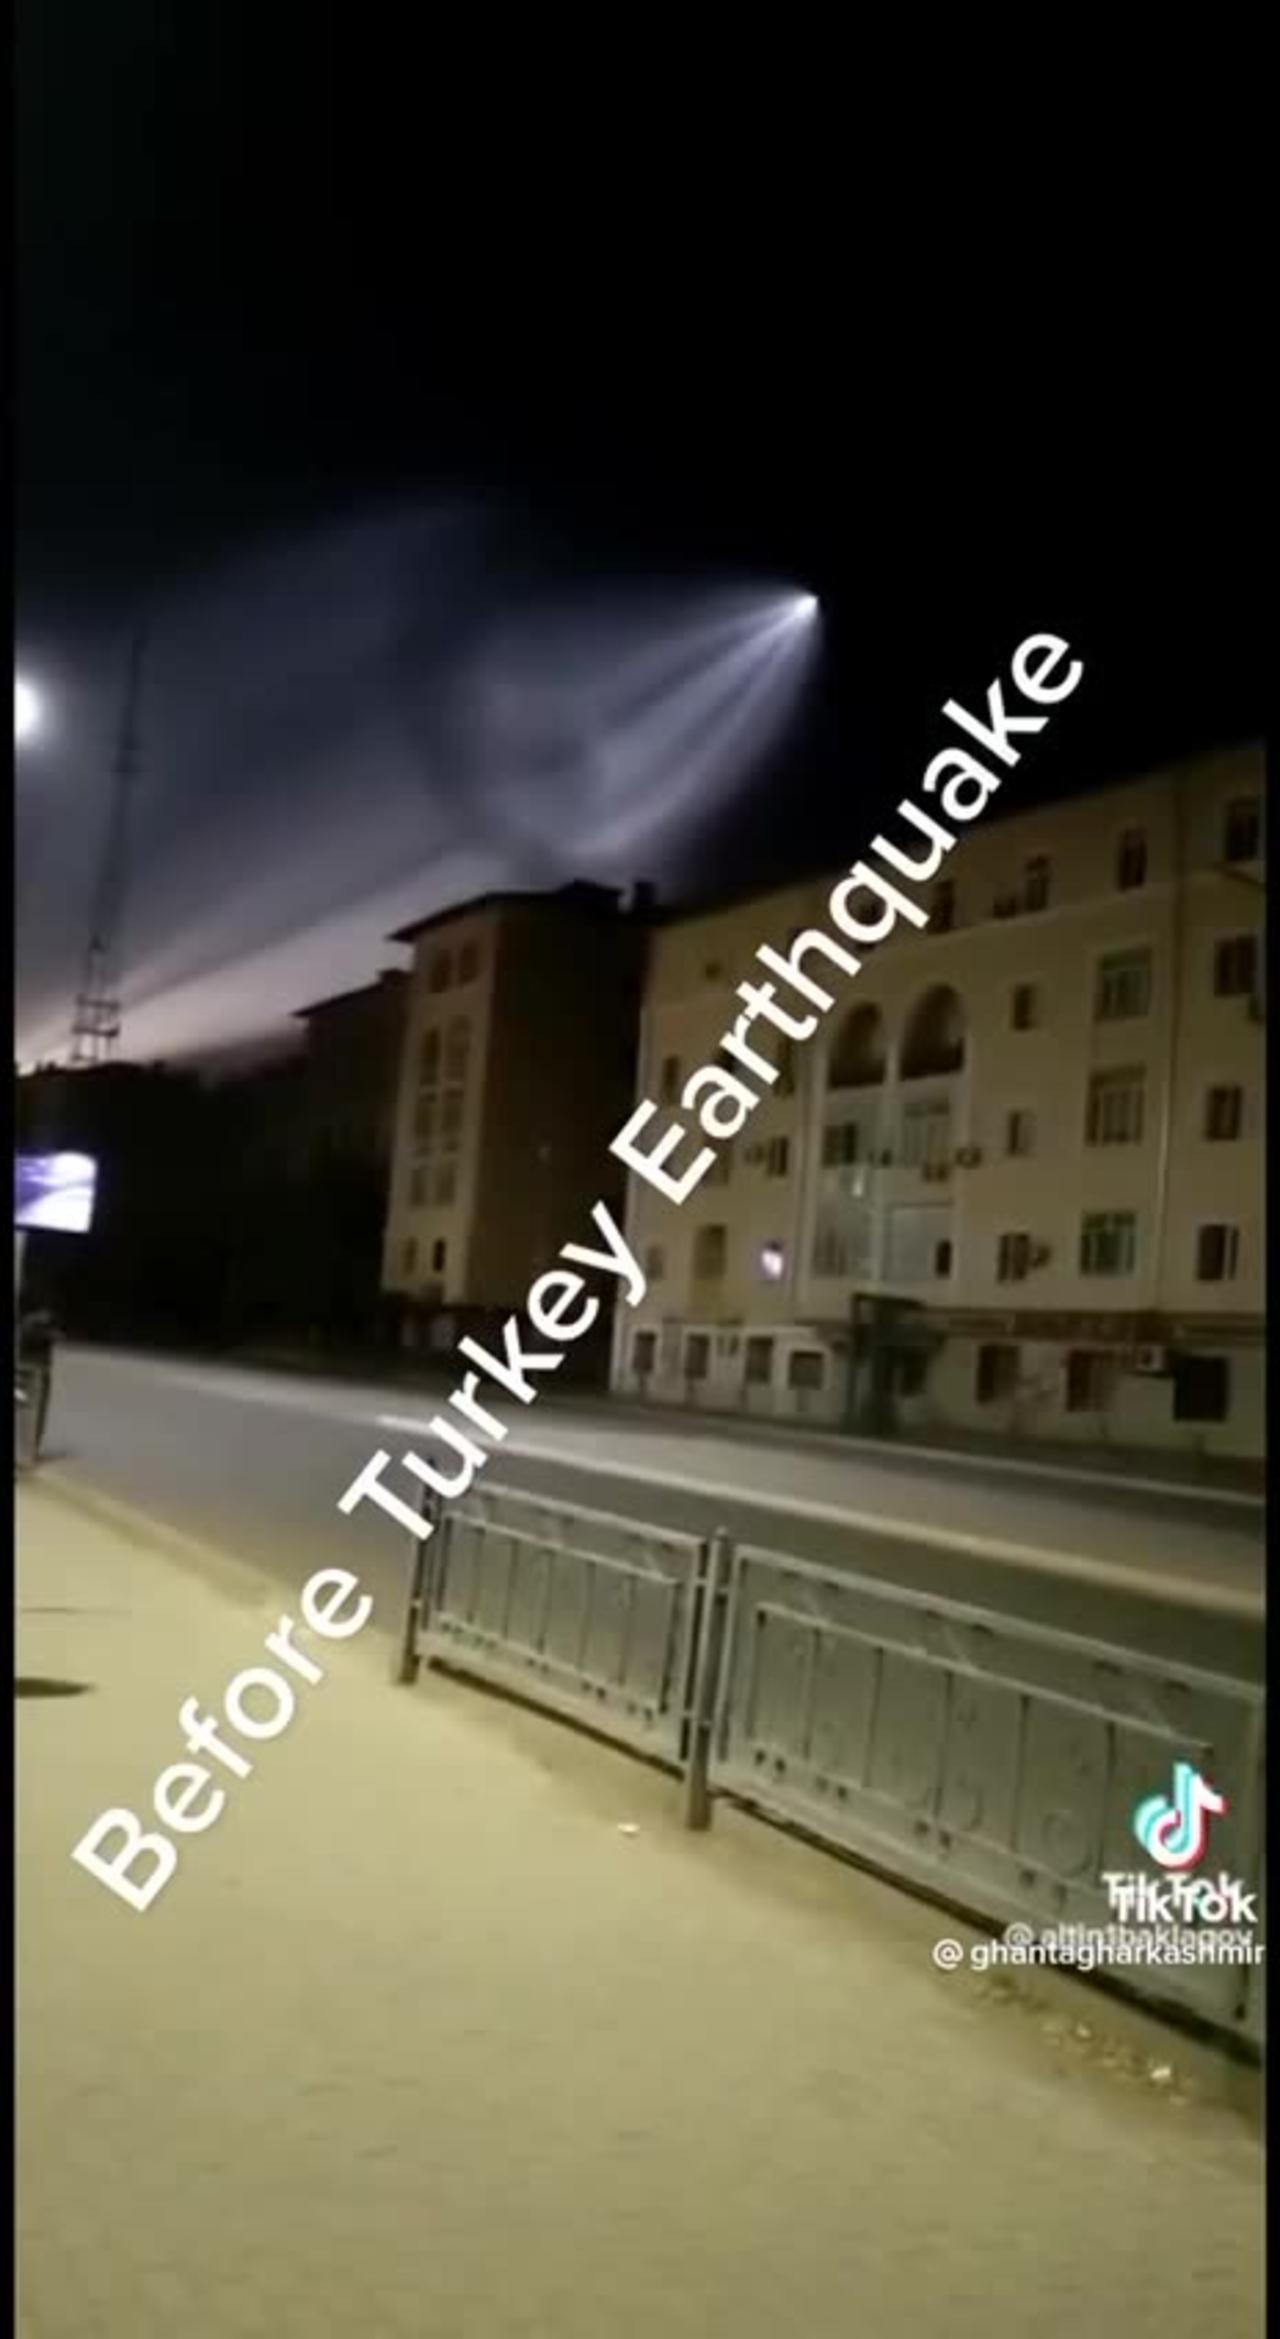 People in Turkey saw this strange light in the sky right before the earthquake